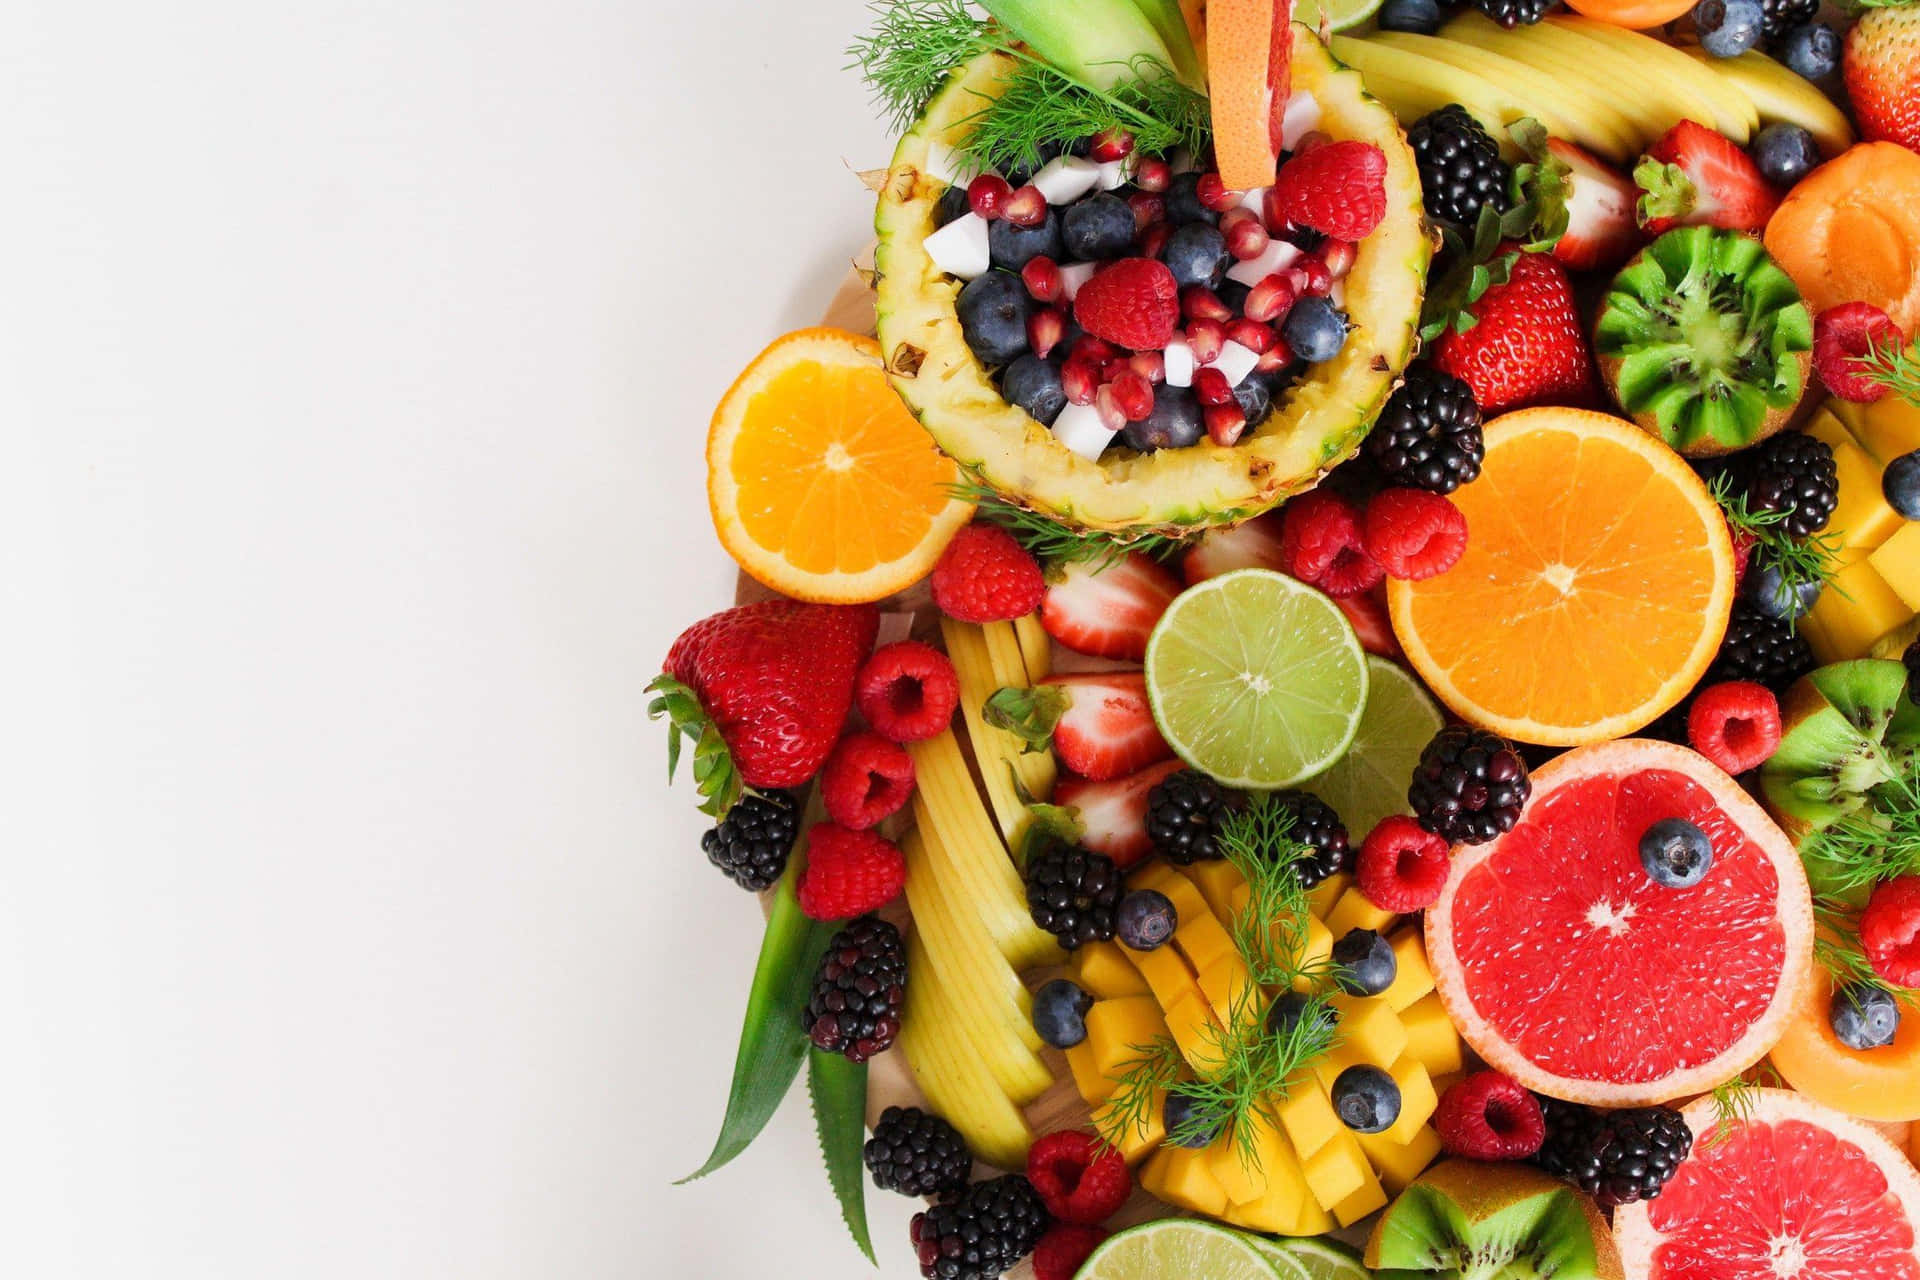 Healthy Food Pile Of Fruits On White Picture